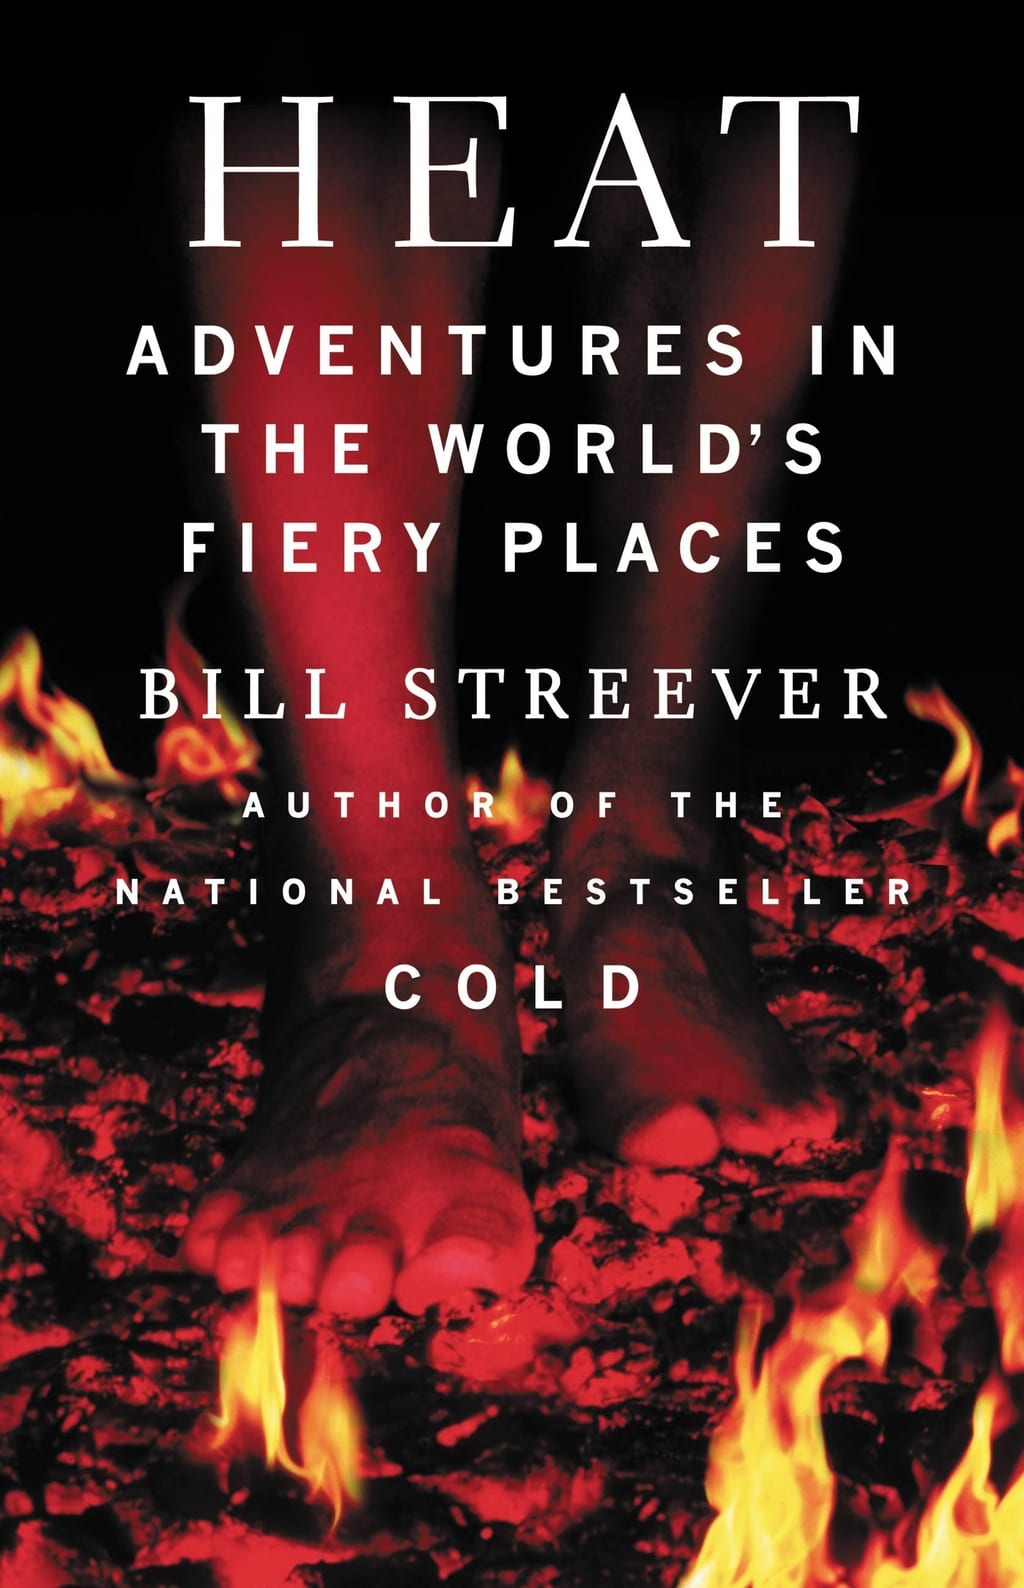 The cover of ‘Heat,’ a 2013 book by Bill Streever. Image Credit: Little, Brown and Co.